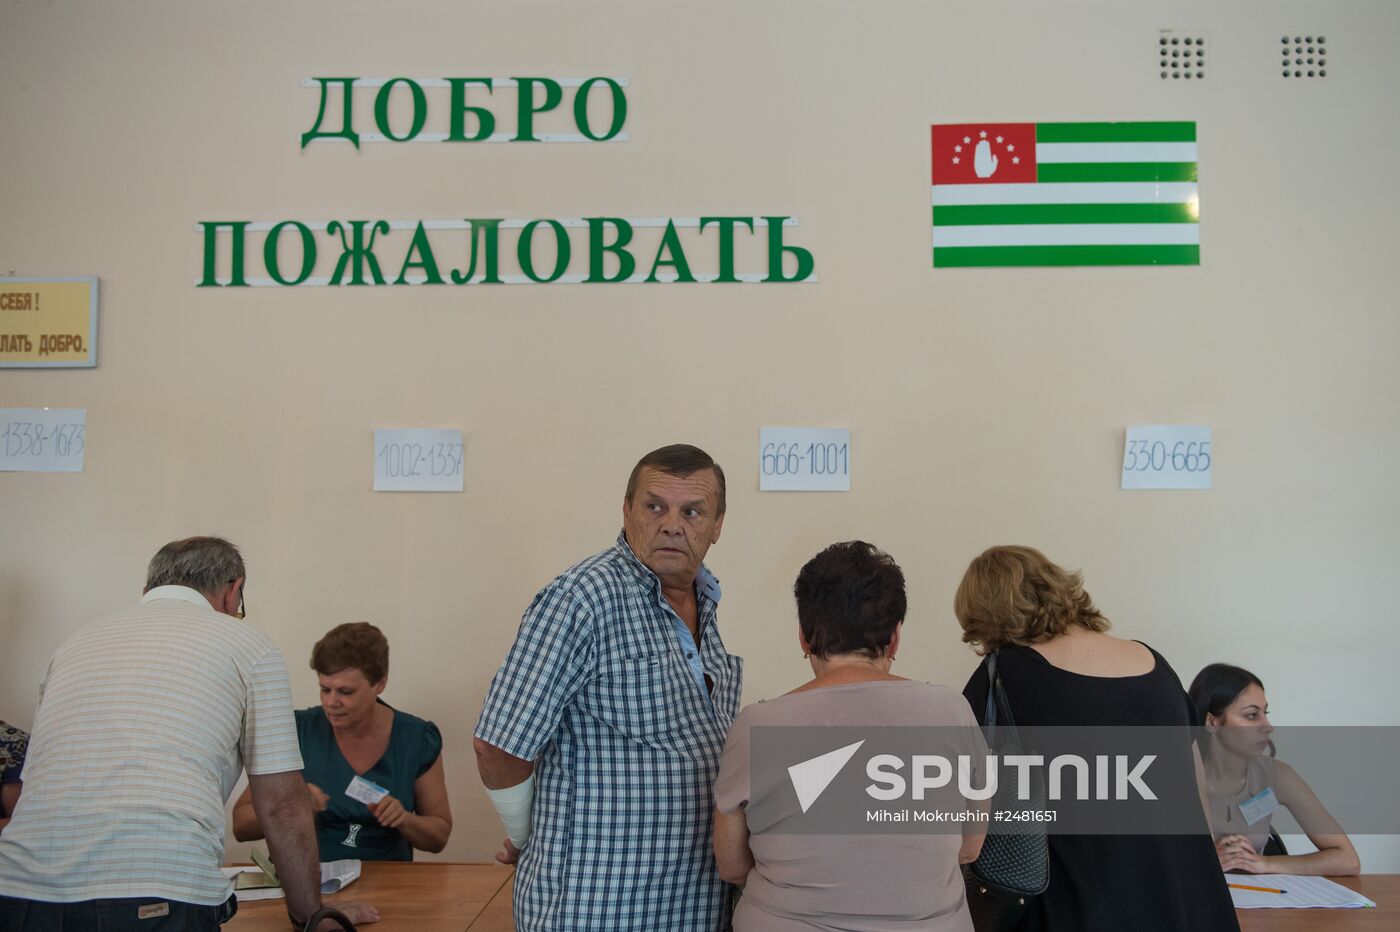 Presidential elections in Abkhazia